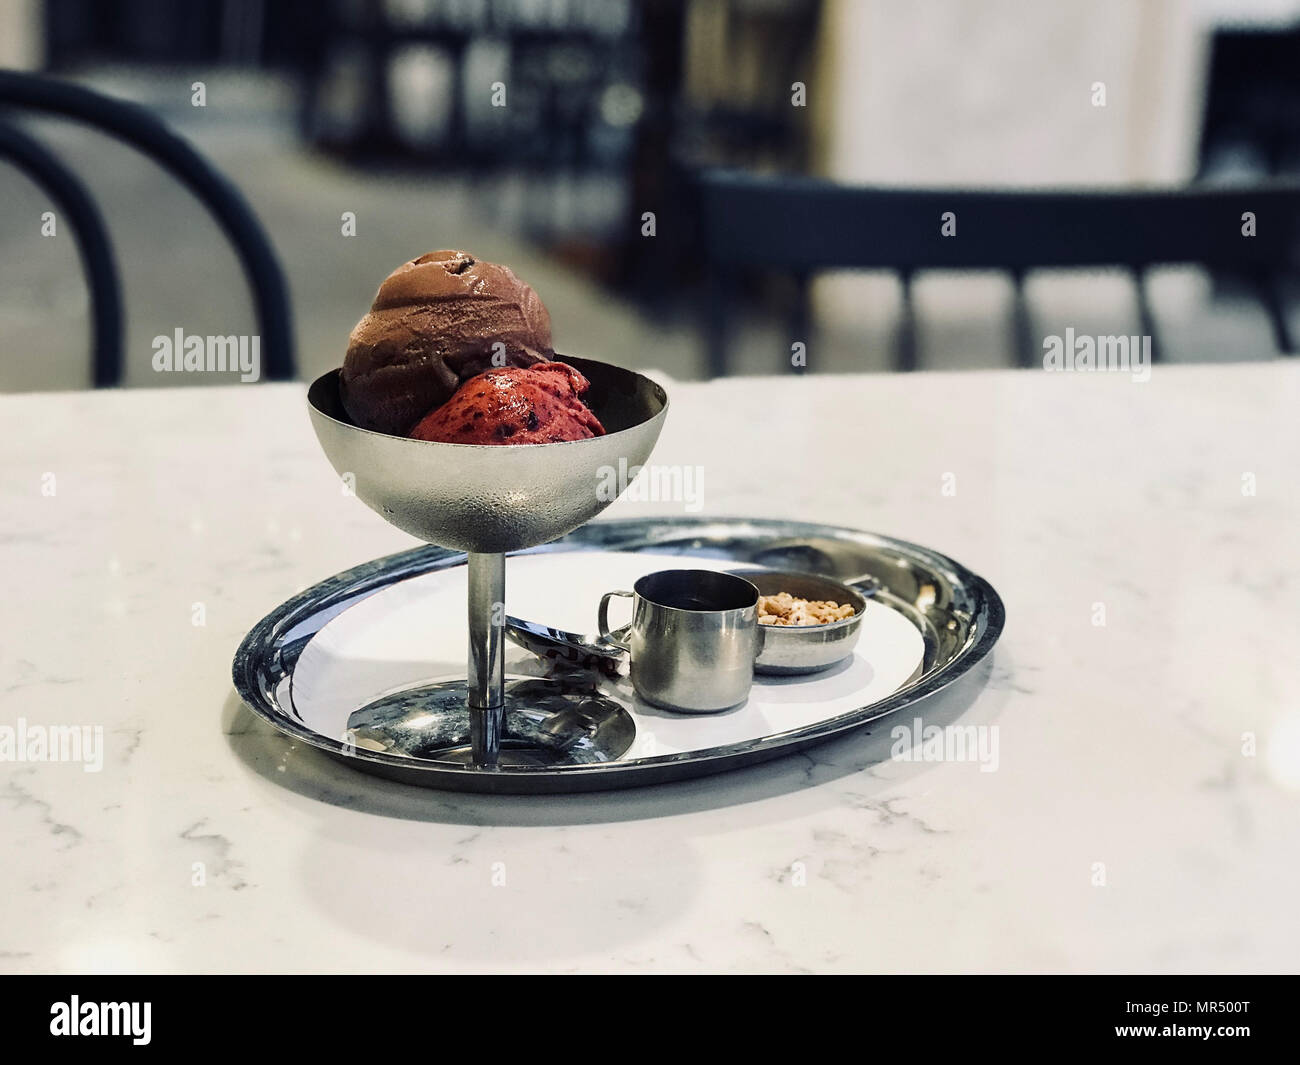 Chocolate and Cherry Ice Cream in Vintage Metal Bowl with Silver Tray. Organic Summer Dessert. Stock Photo